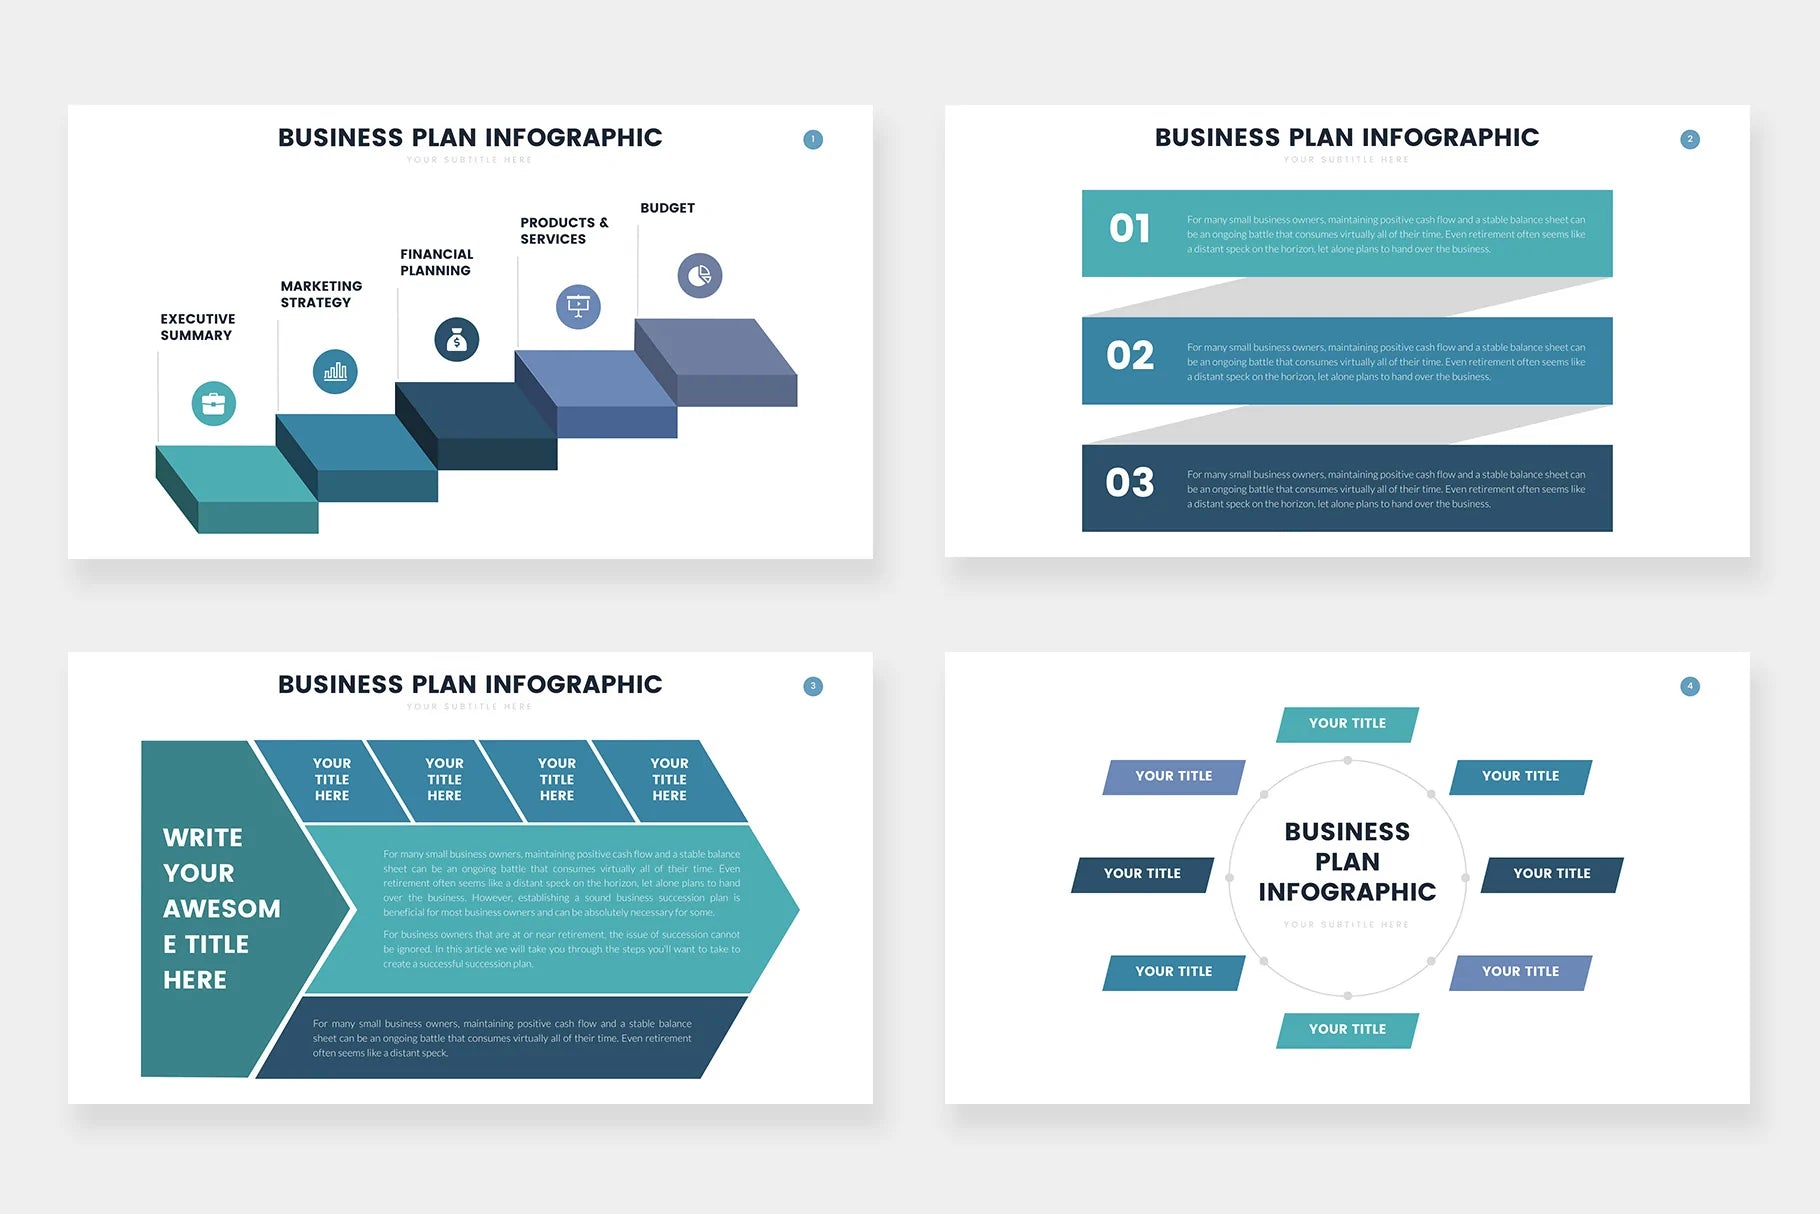 Business Plan Infographic Templates PowerPoint slides